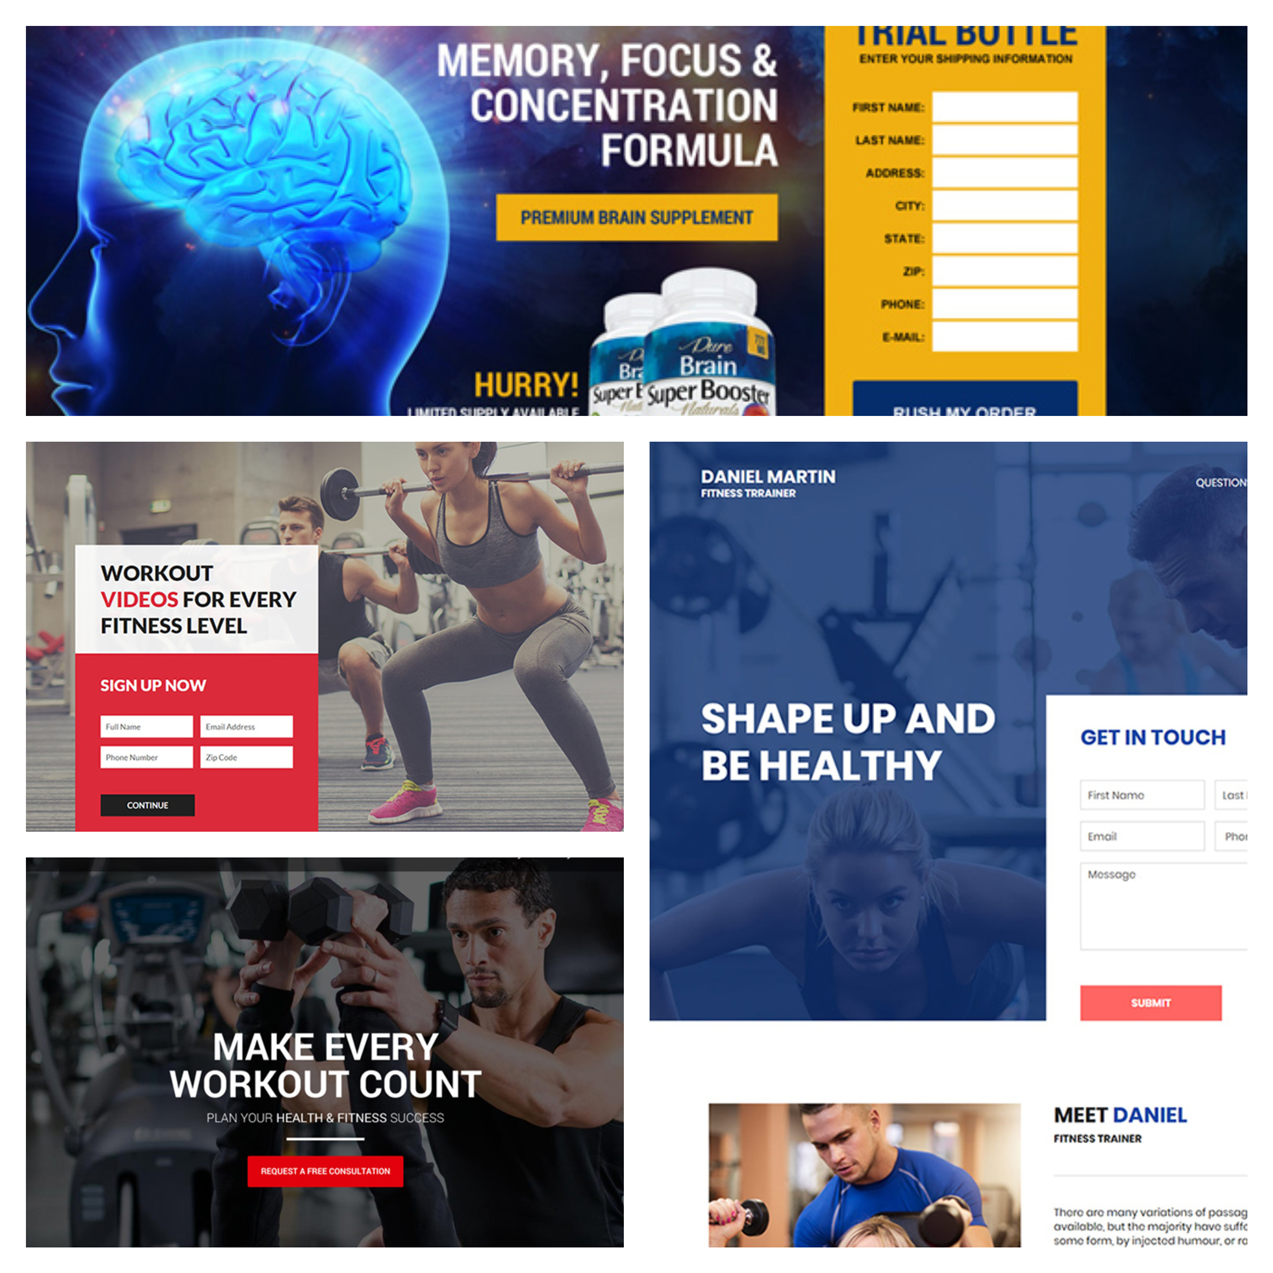 Gym SUPPLEMENTS AD DIGITAL VIDEO Template